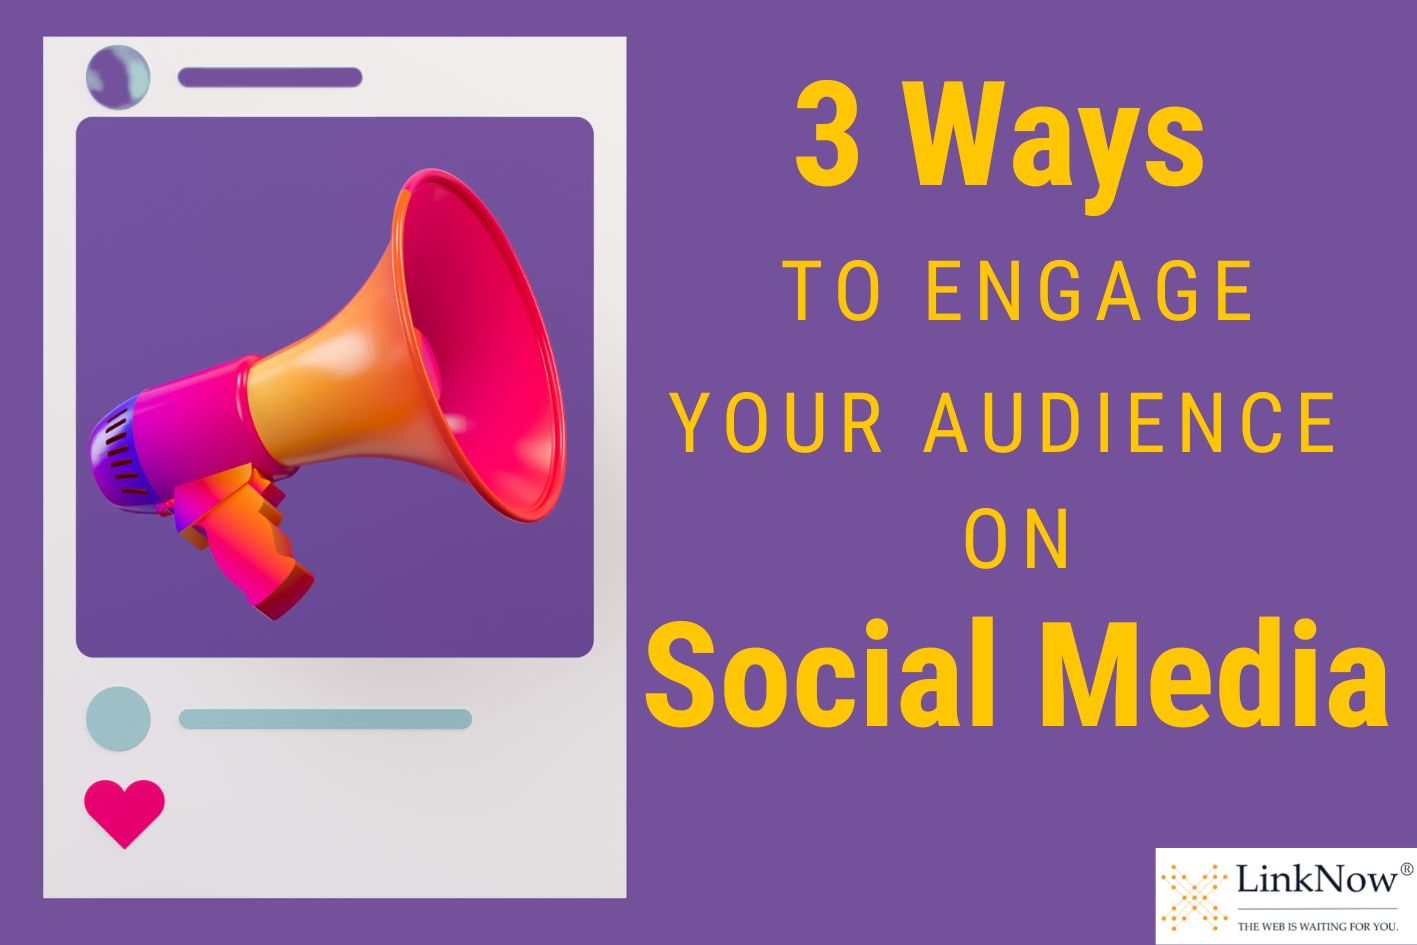 On left, a pretend-social media post featuring an image of a megaphone. On the right, caption says: 3 ways to engage your audience on social media.